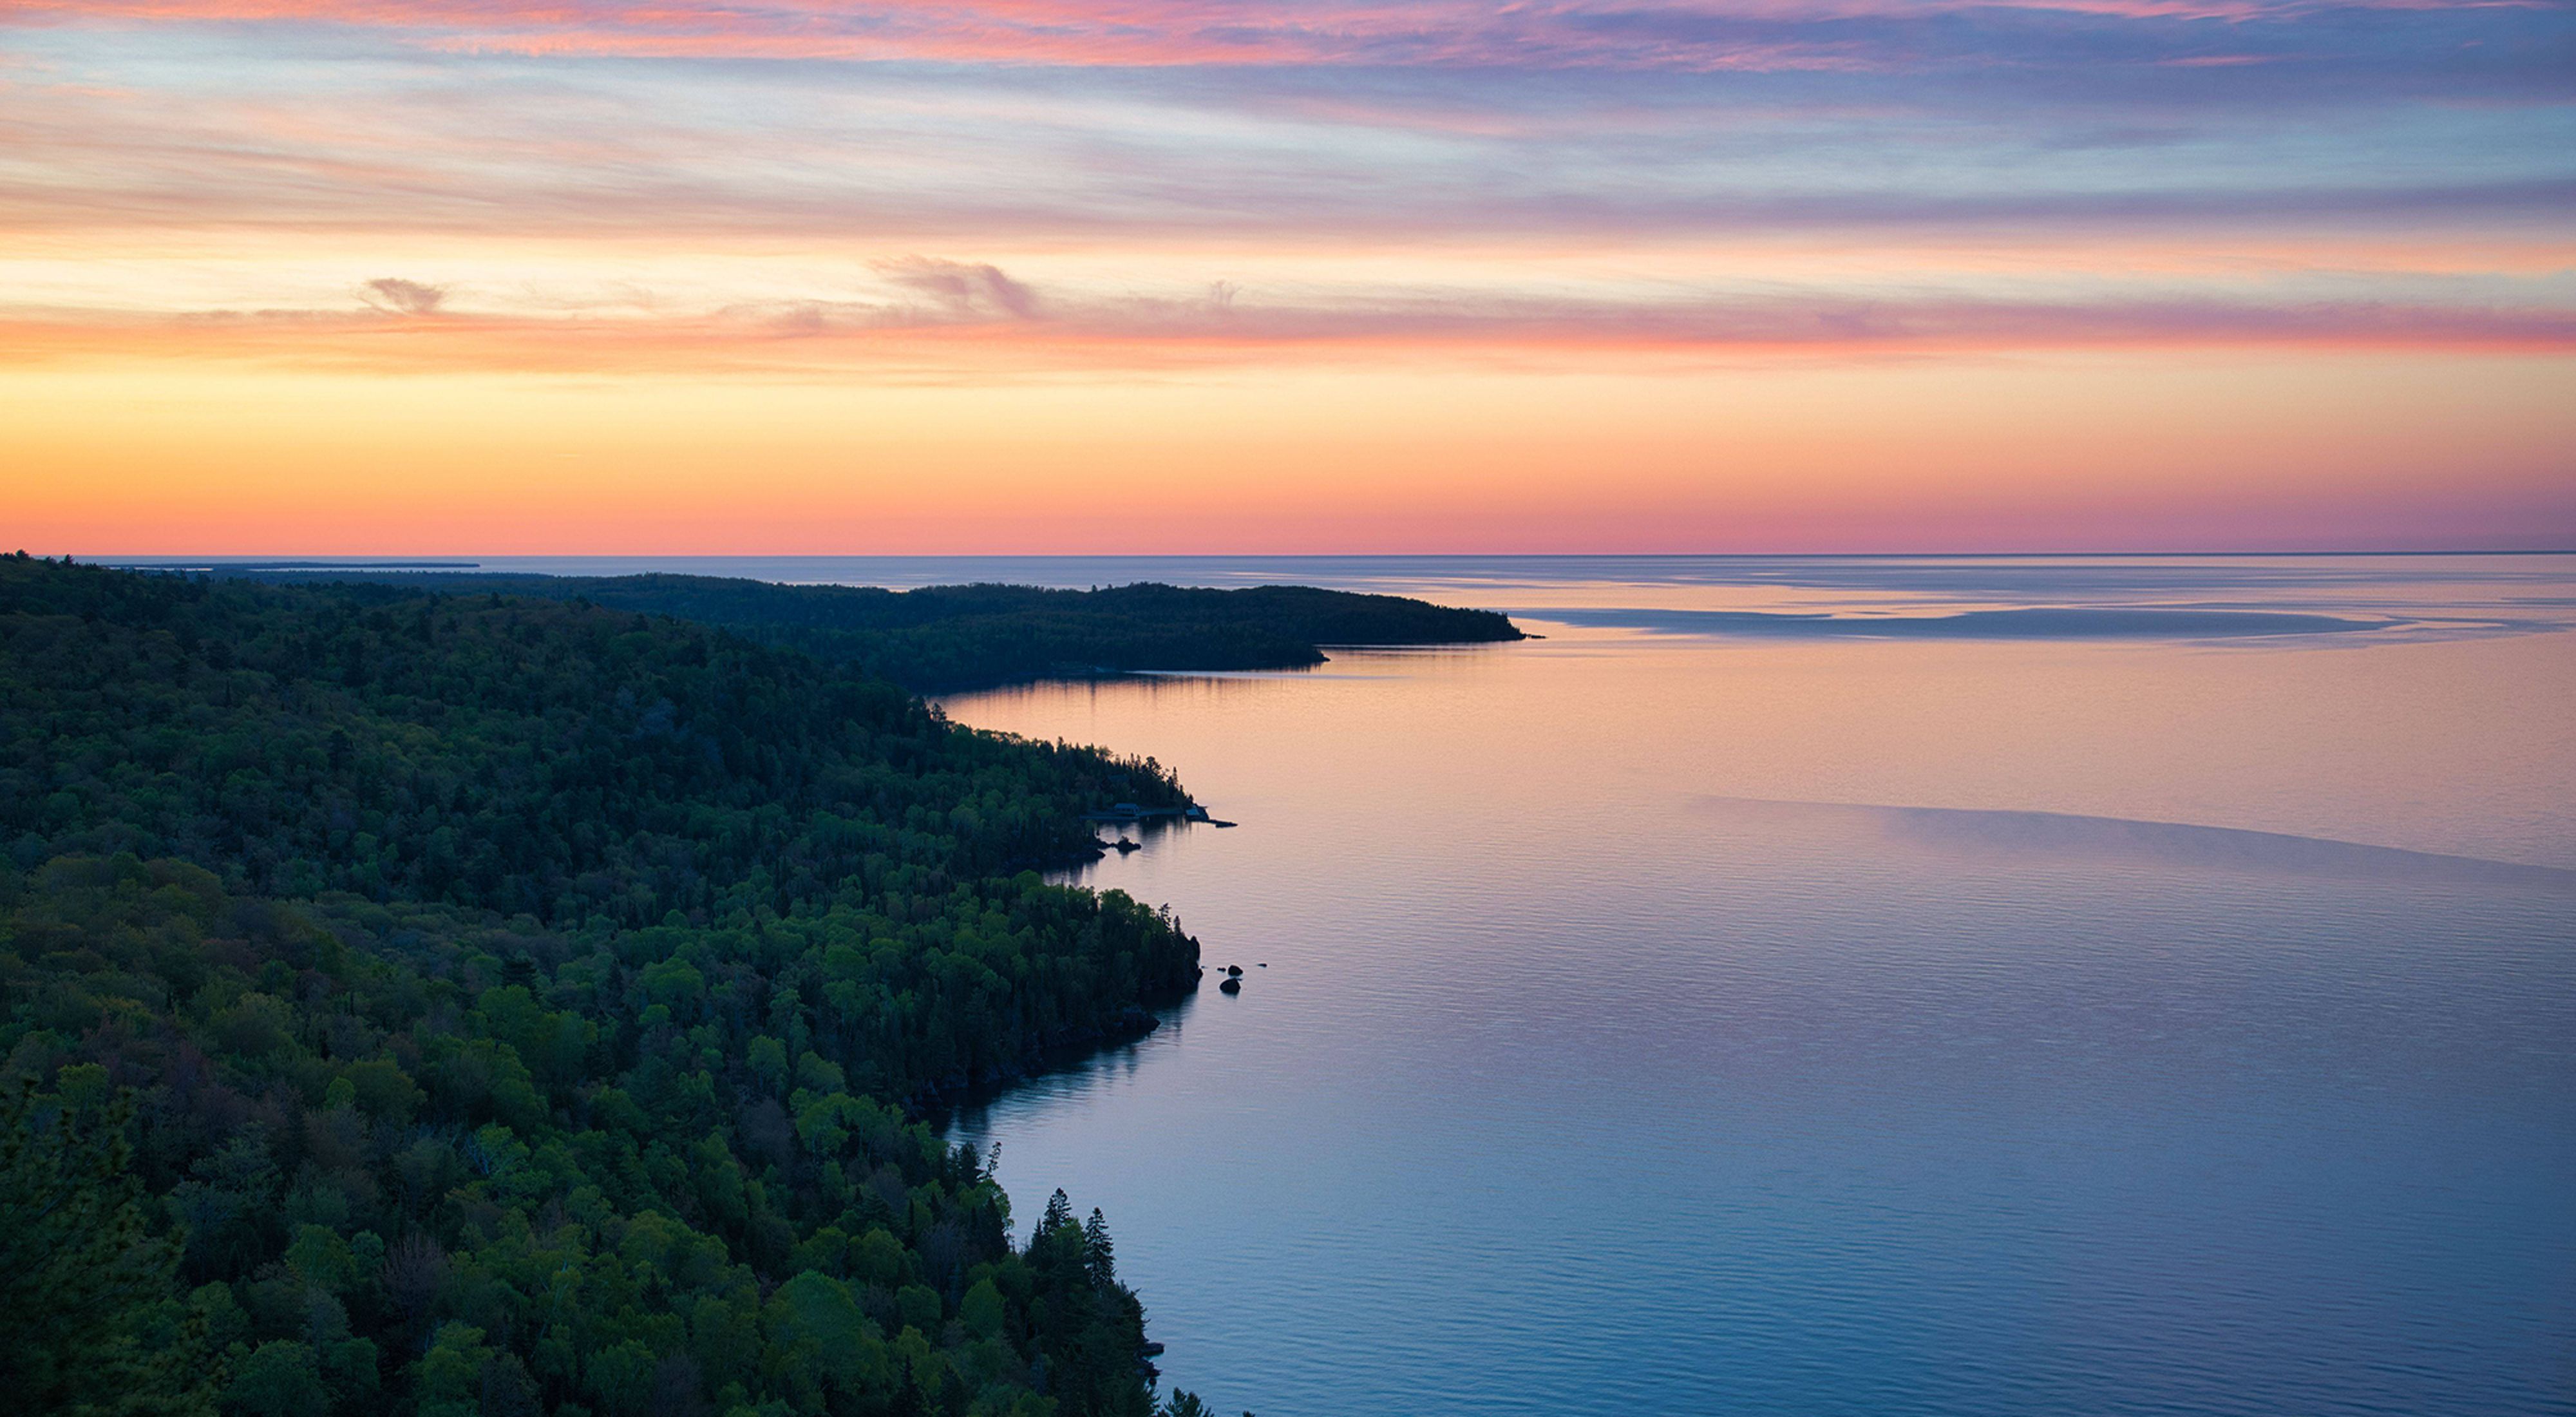 Colorful sunrise over Copper Harbor's peninsula in Michigan. The sky is filled with pastel pinks, oranges, and blues. The colors reflect in the water. The forest is thick with lush, green trees. 